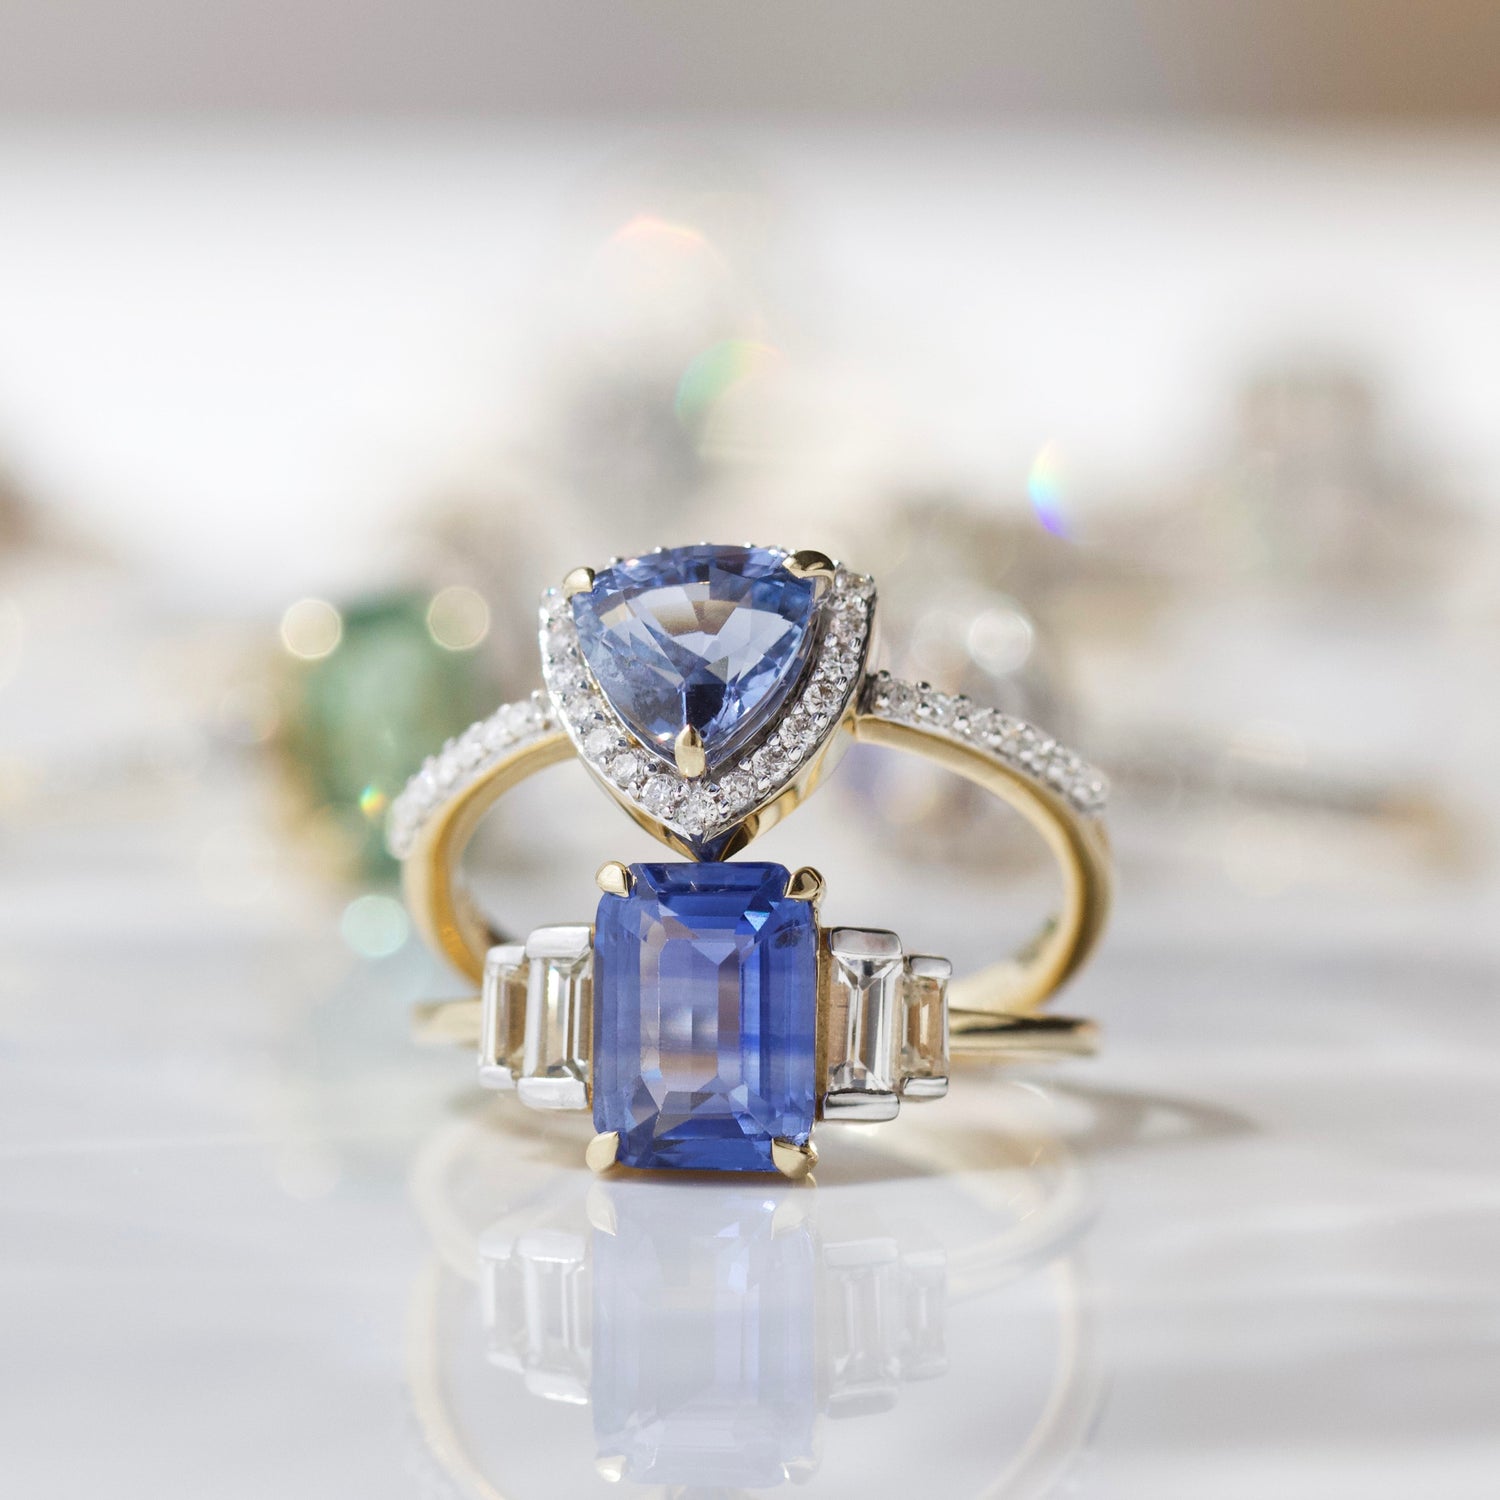 Exclusive blue sapphire and diamond engagement ring in solid gold